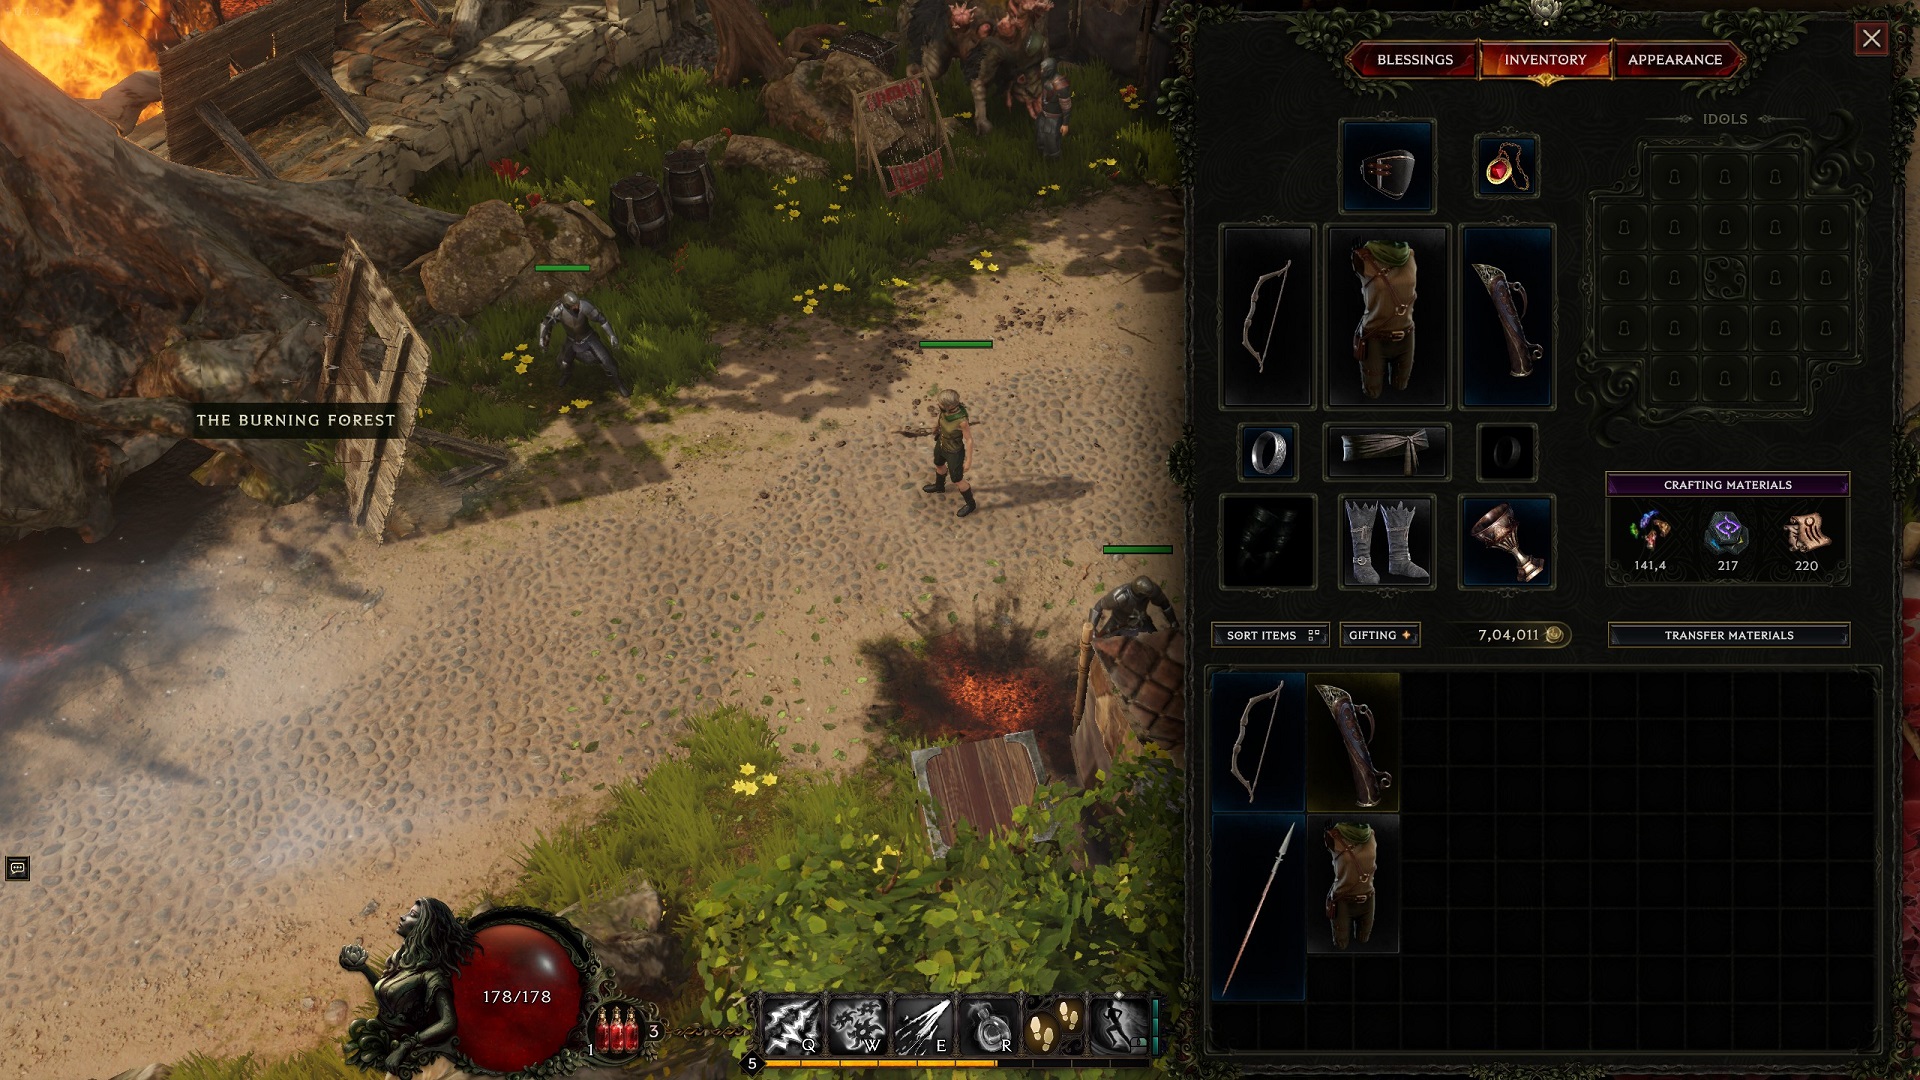 An image showing the Rogue's inventory in Last Epoch.